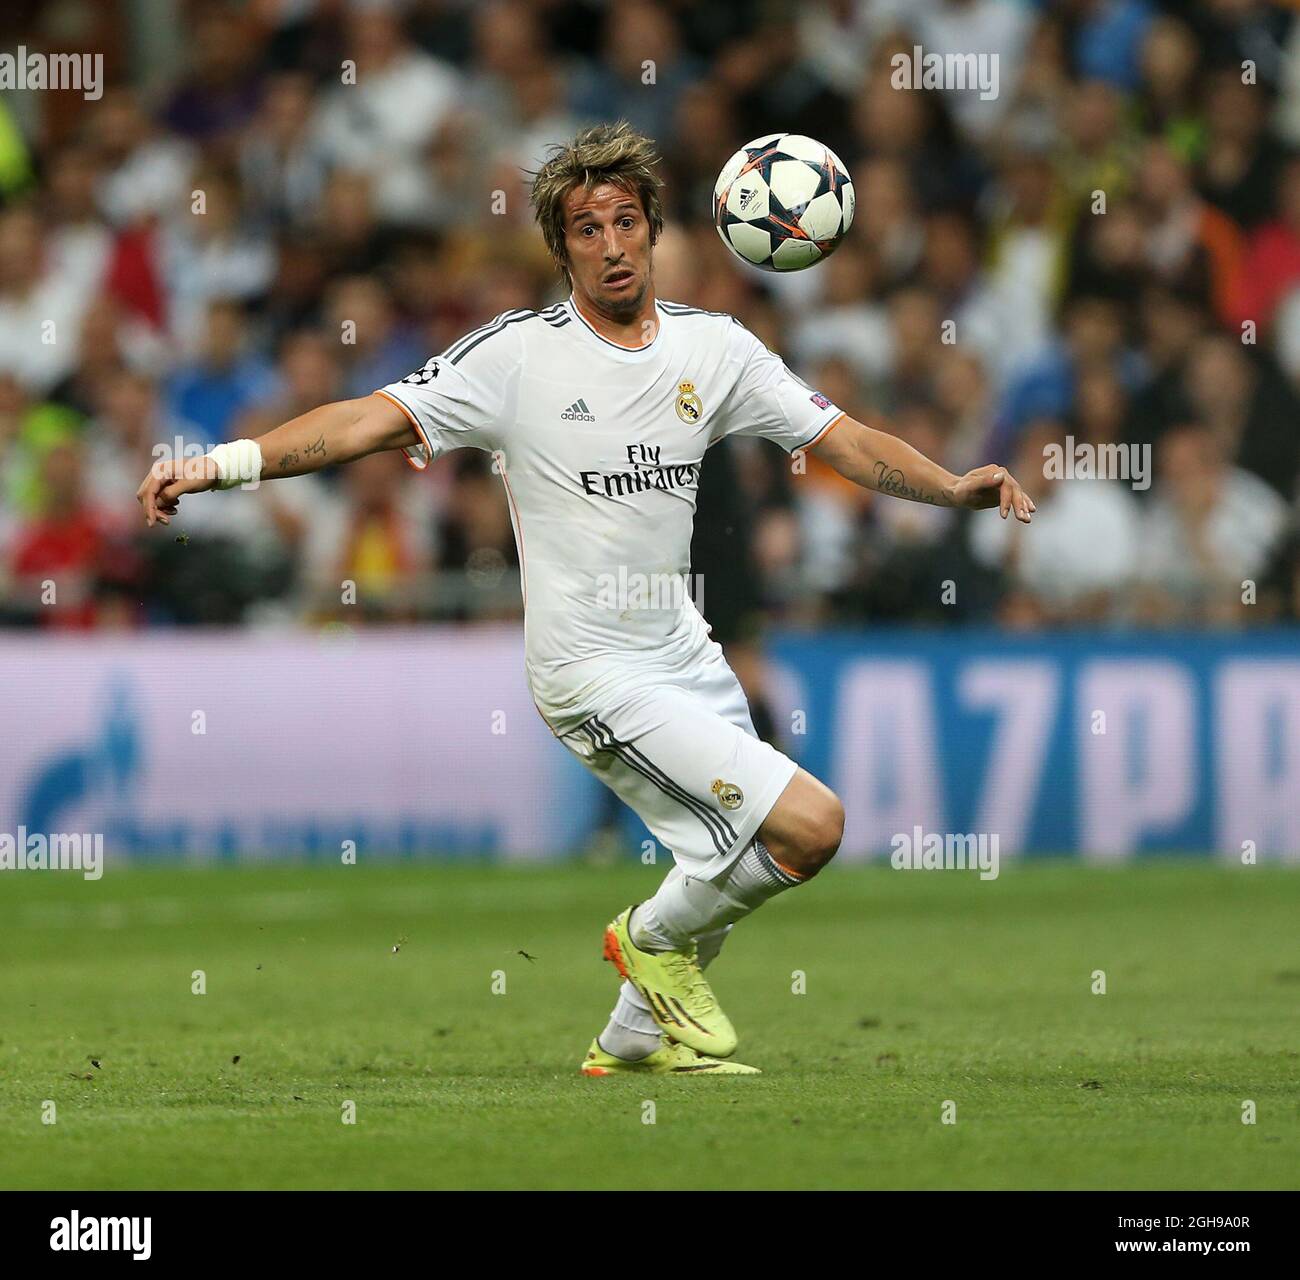 Real Madrid's Fabio Coentrao in action during their UEFA Champion League semi-final first leg soccer match between Real Madrid and Bayern Munich at Santiago Bernabeu in Madrid, Spain on April 23, 2014. Pic David Klein Stock Photo